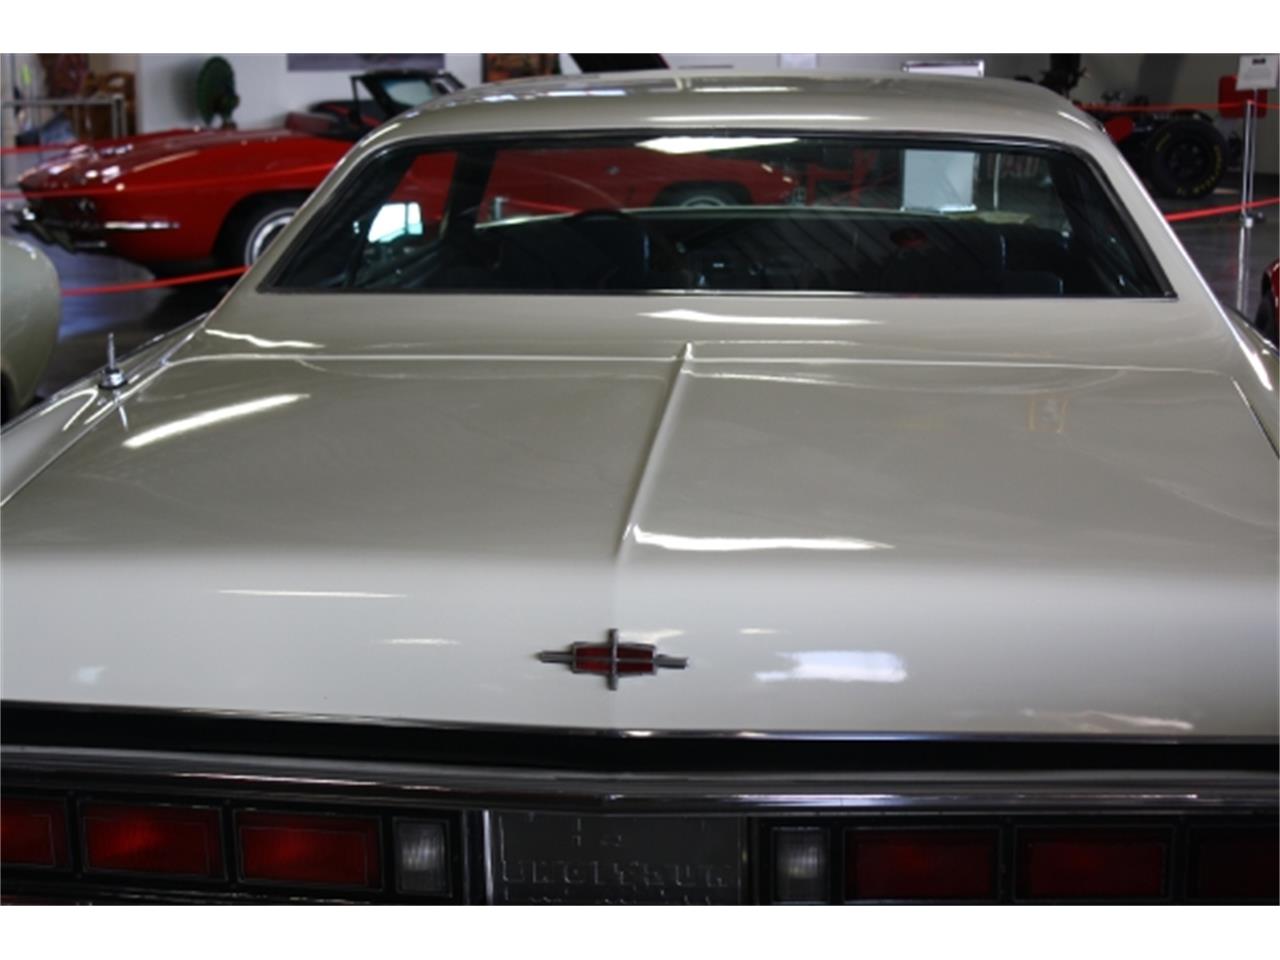 1973 Lincoln Continental for Sale | ClassicCars.com | CC ...